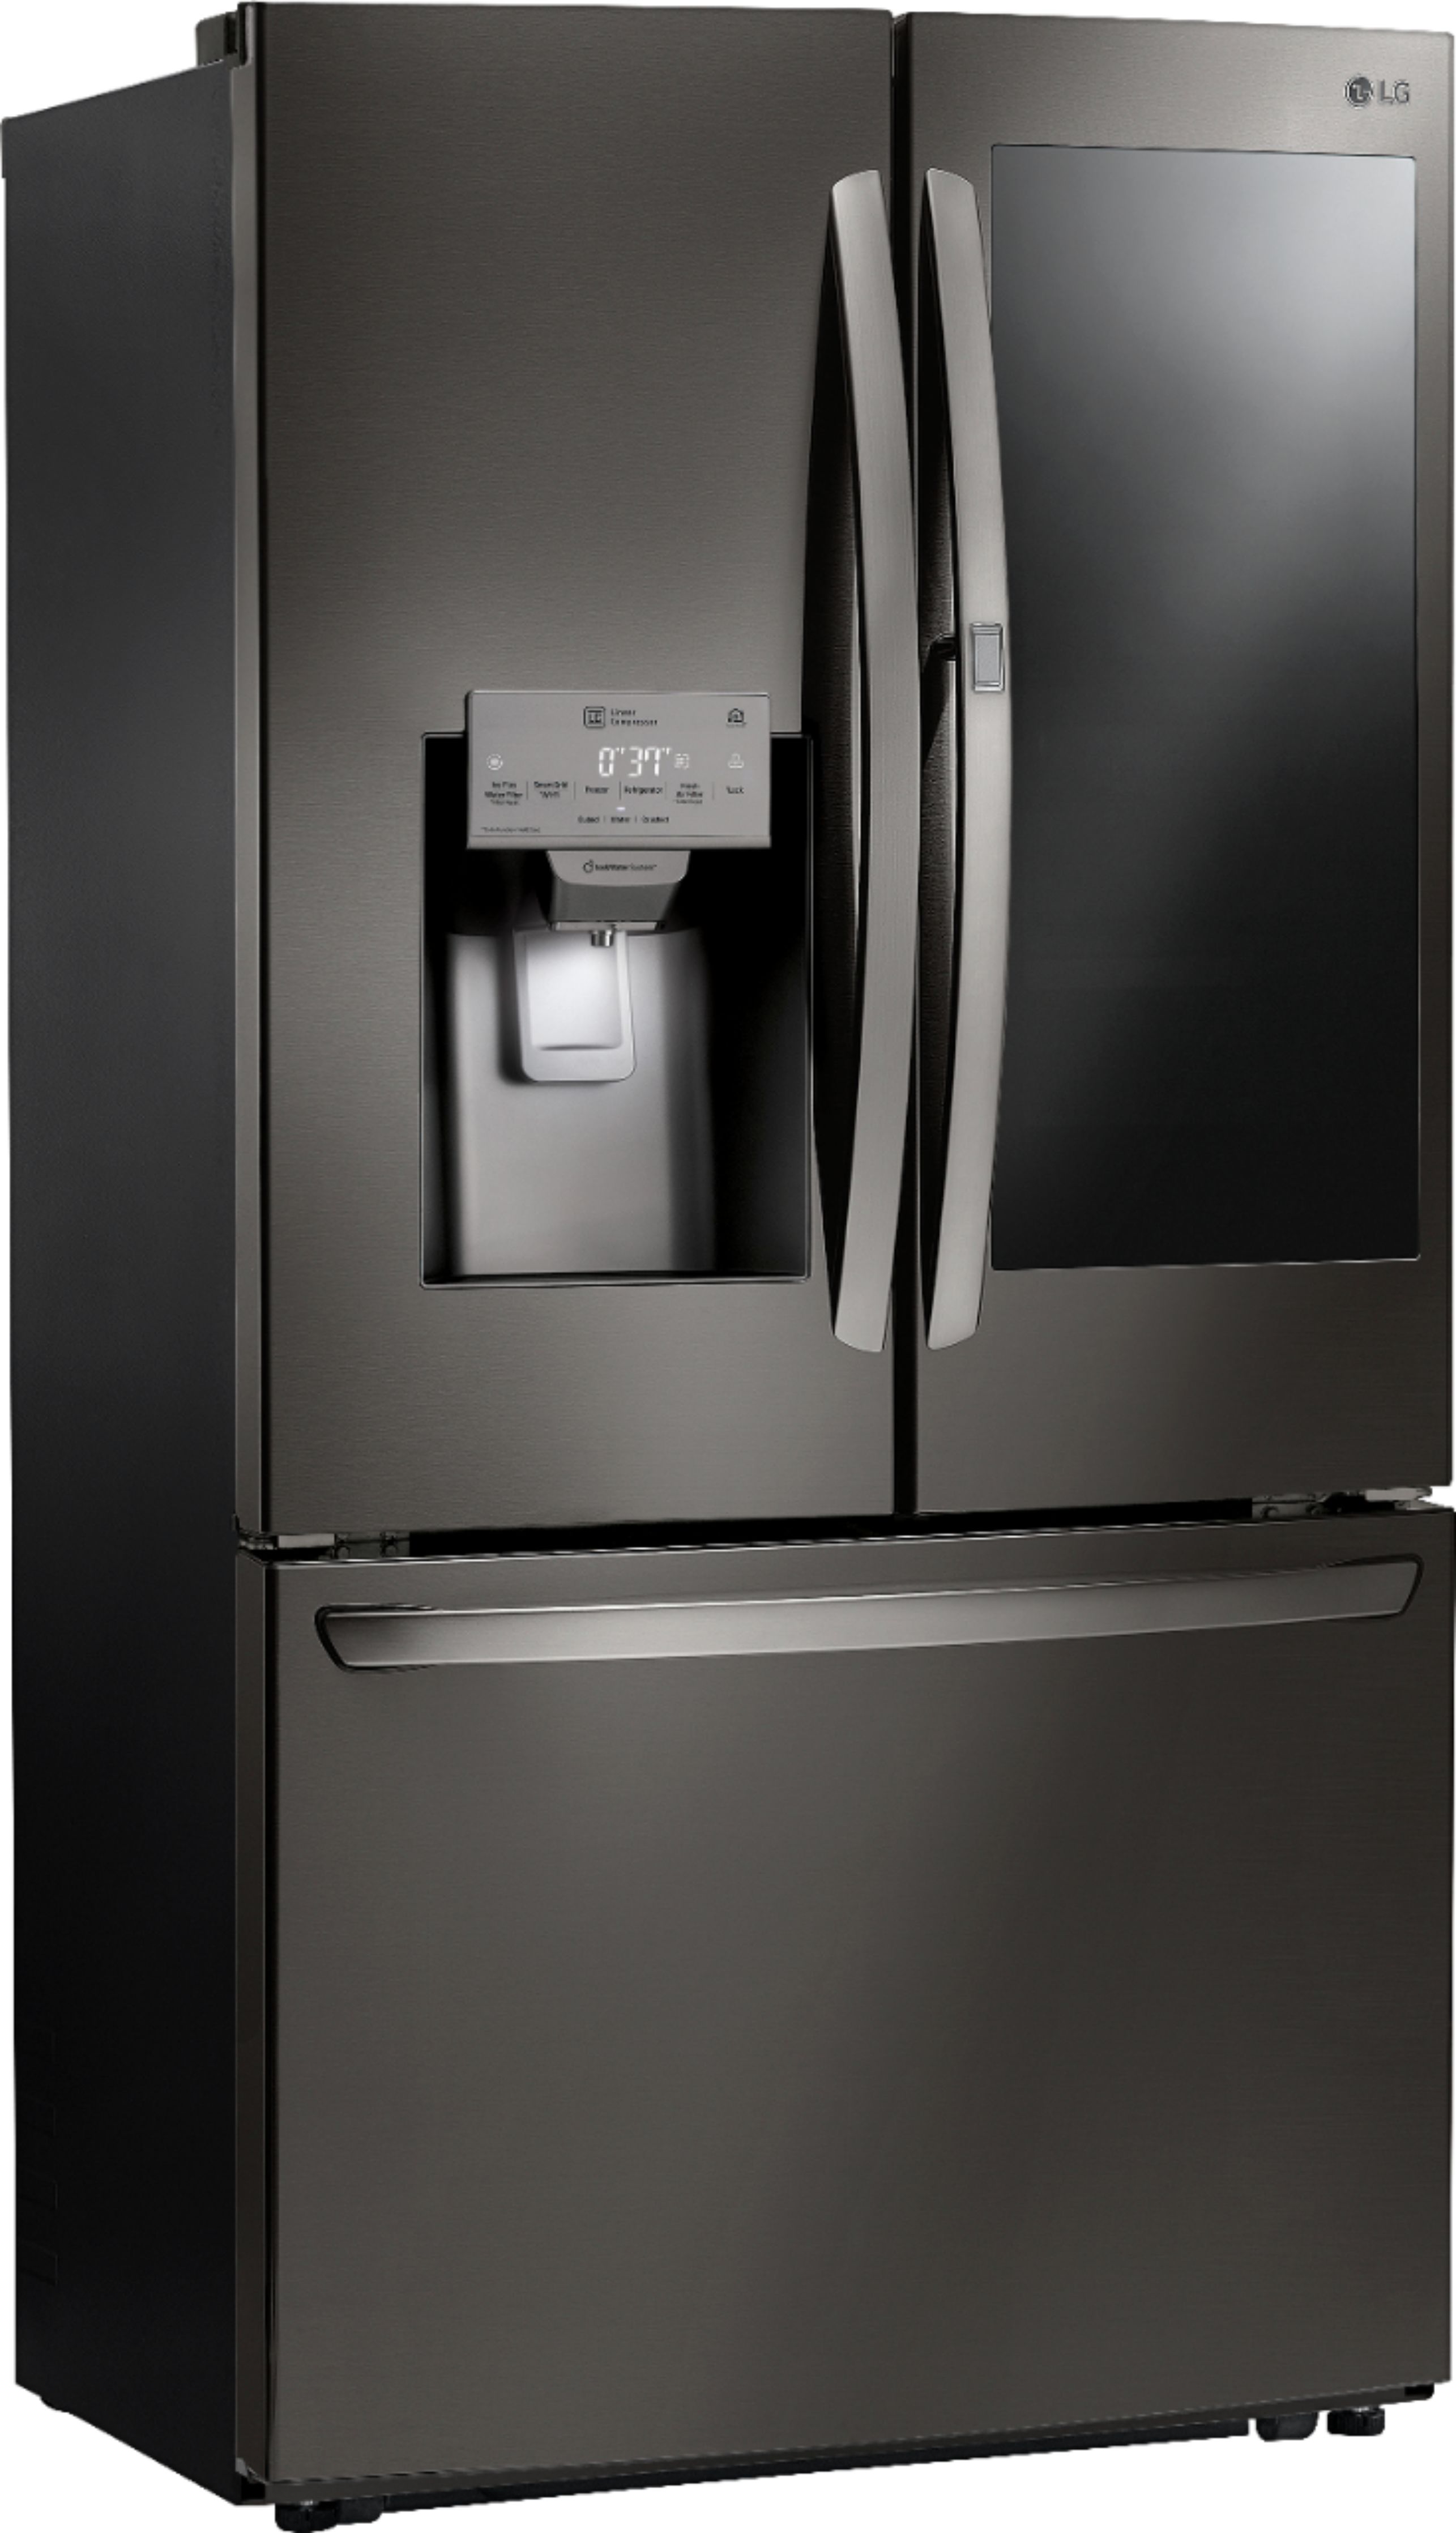 Angle View: LG - 26 Cu. Ft. French Door-in-Door Smart Refrigerator with Dual Ice Maker and InstaView - Black Stainless Steel